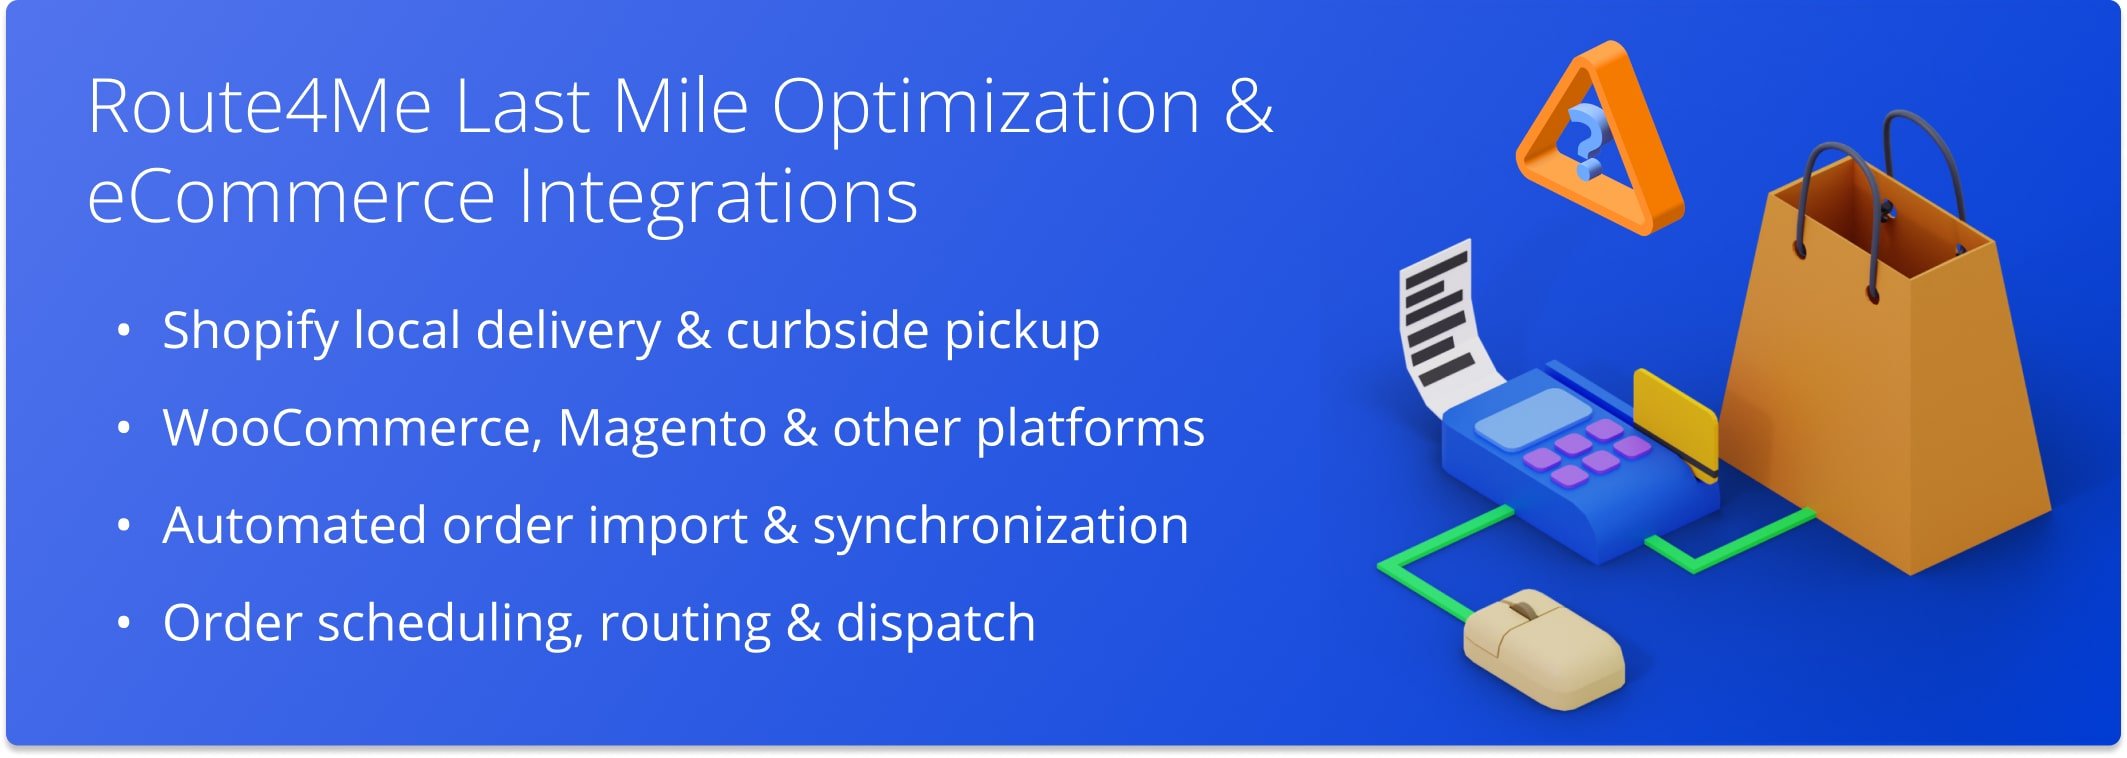 eCommerce Integrations with Route4Me's Last Mile Route Optimization Software: Shopify local delivery and curbside pickup, WooCommerce, and Magento order import, scheduling, routing, and dispatch.